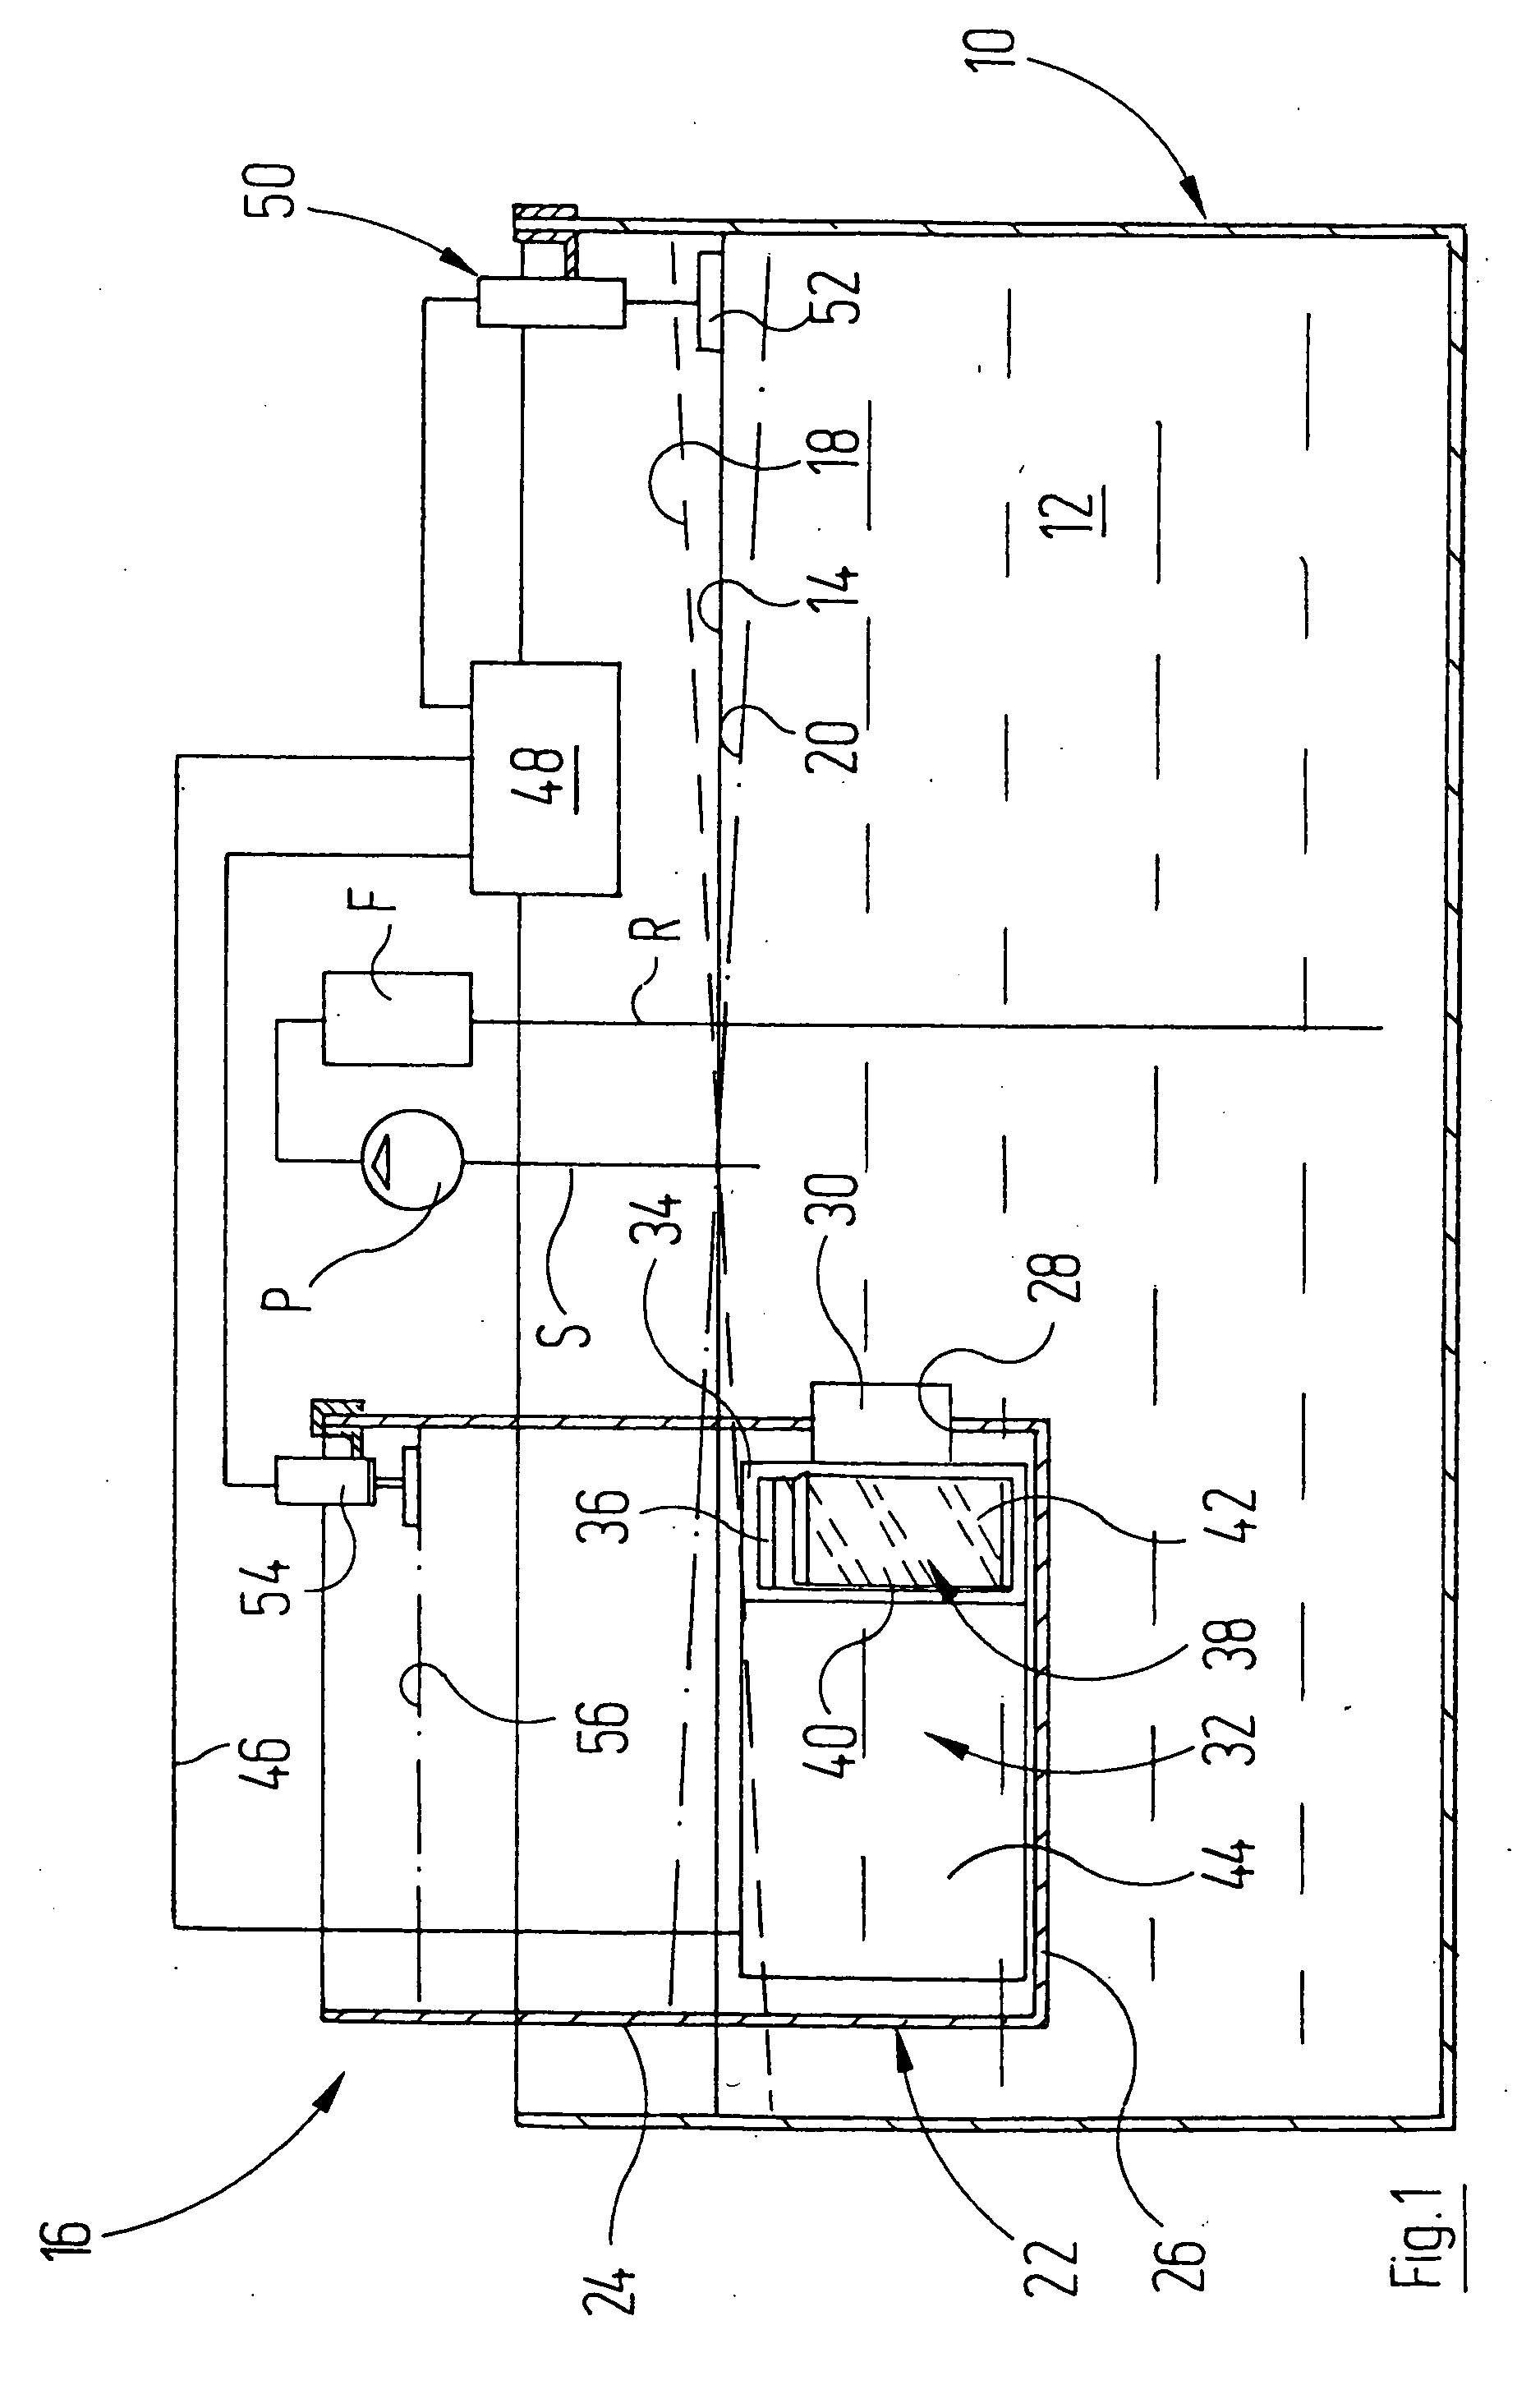 Method and device for generating waves in an aquarium